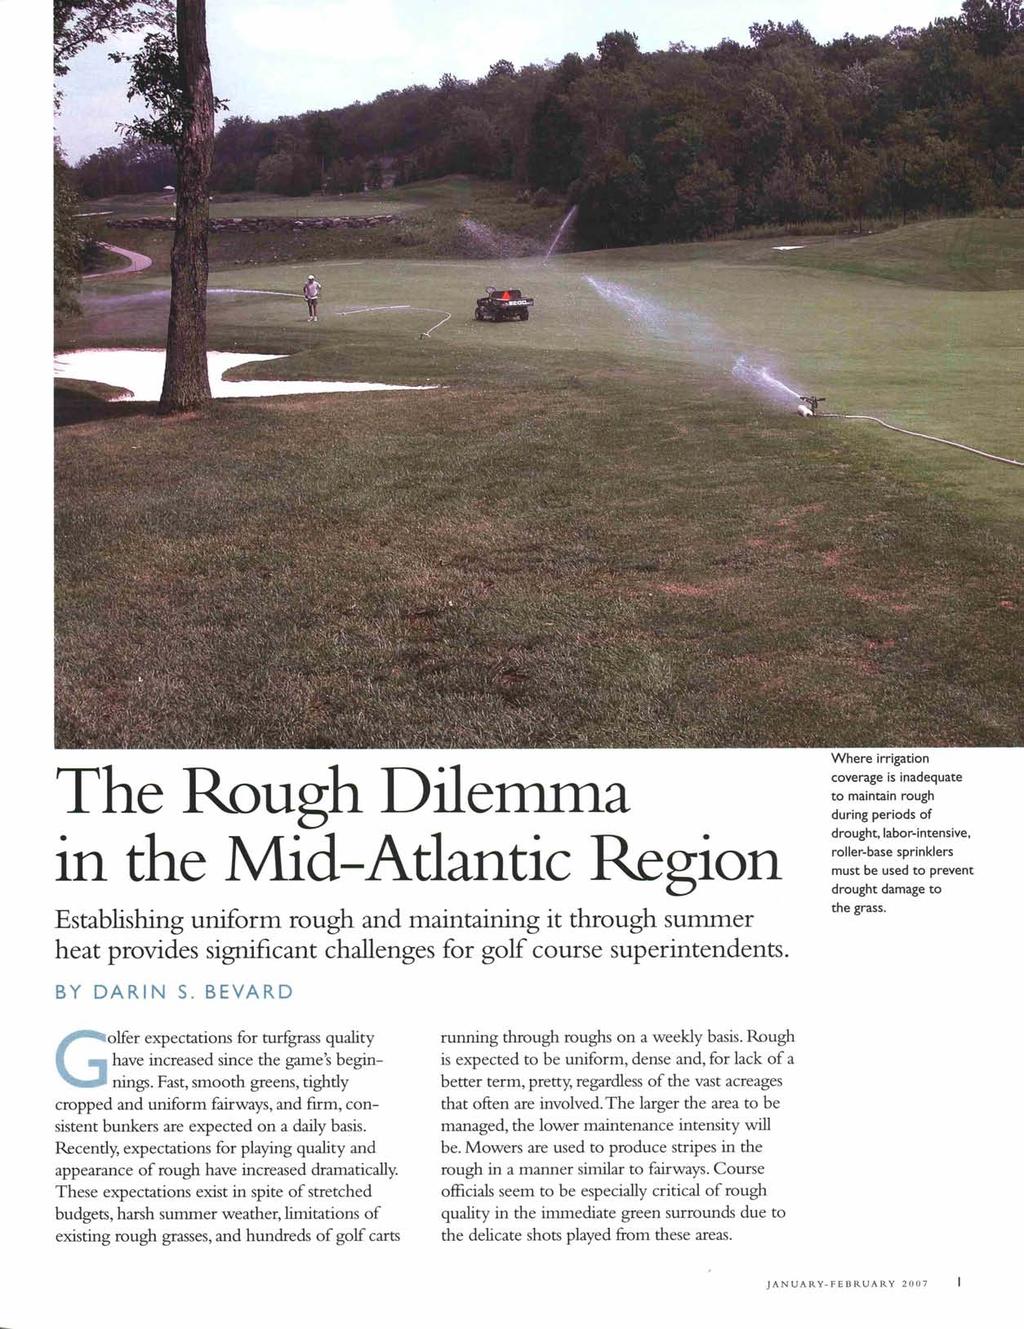 The Rough Dilenuna in the Mid-Atlantic Region Establishing uniform rough and maintaining it through sununer heat provides significant challenges for golf course superintendents.